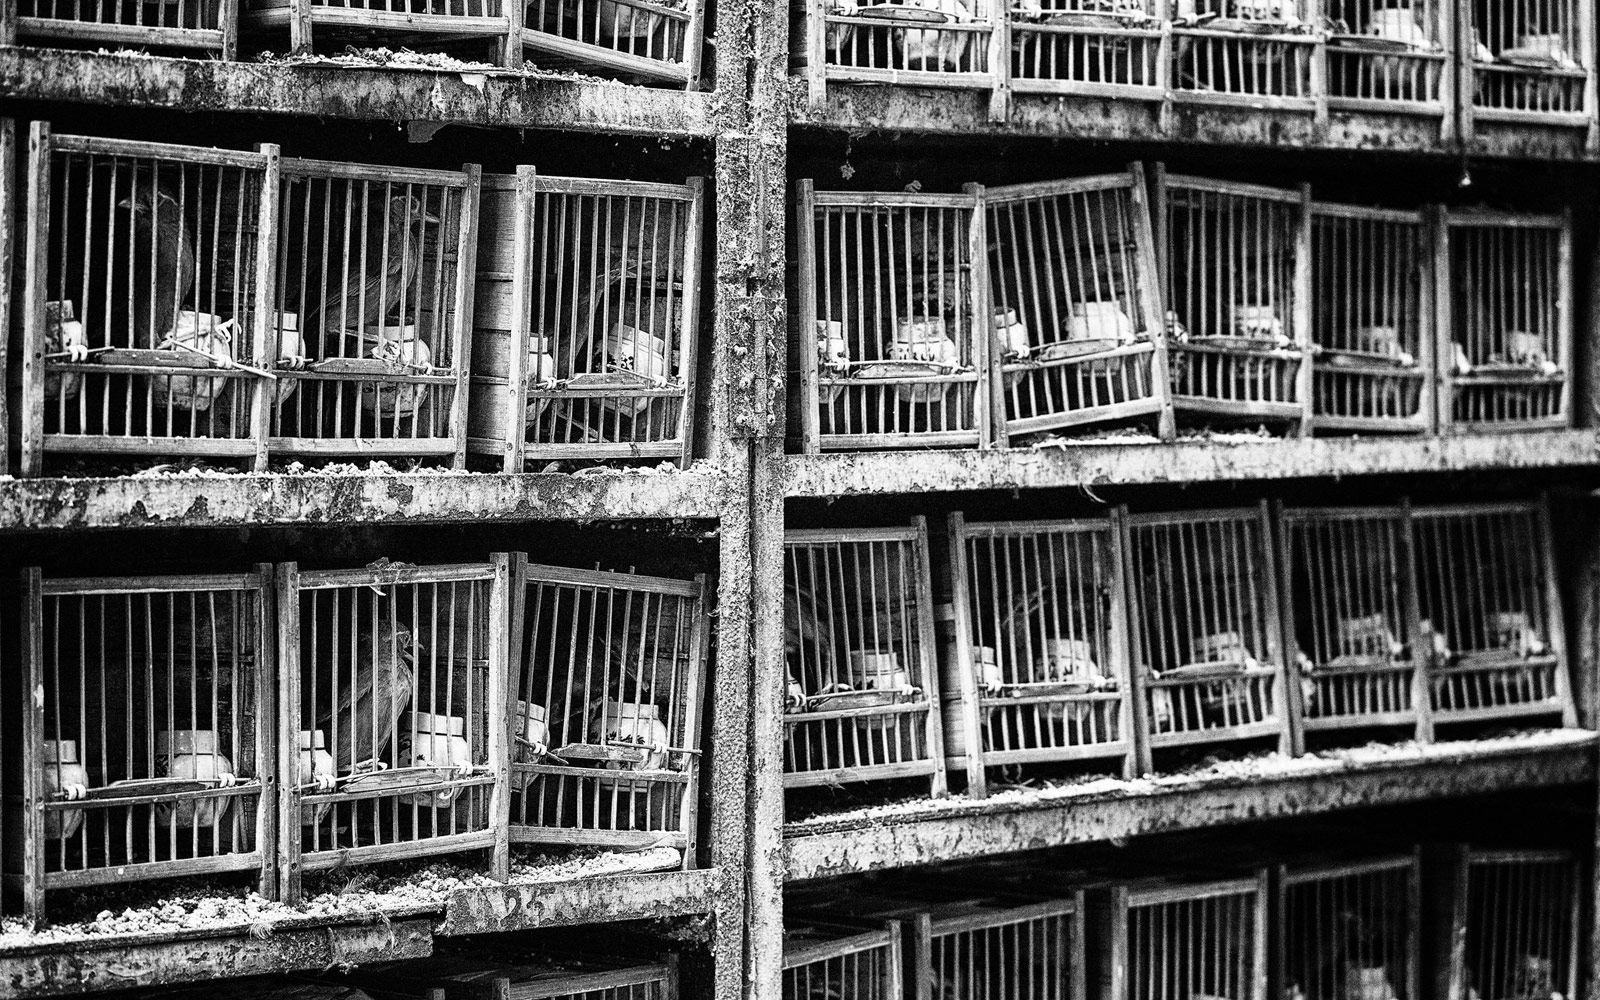 Birds in their cages, China